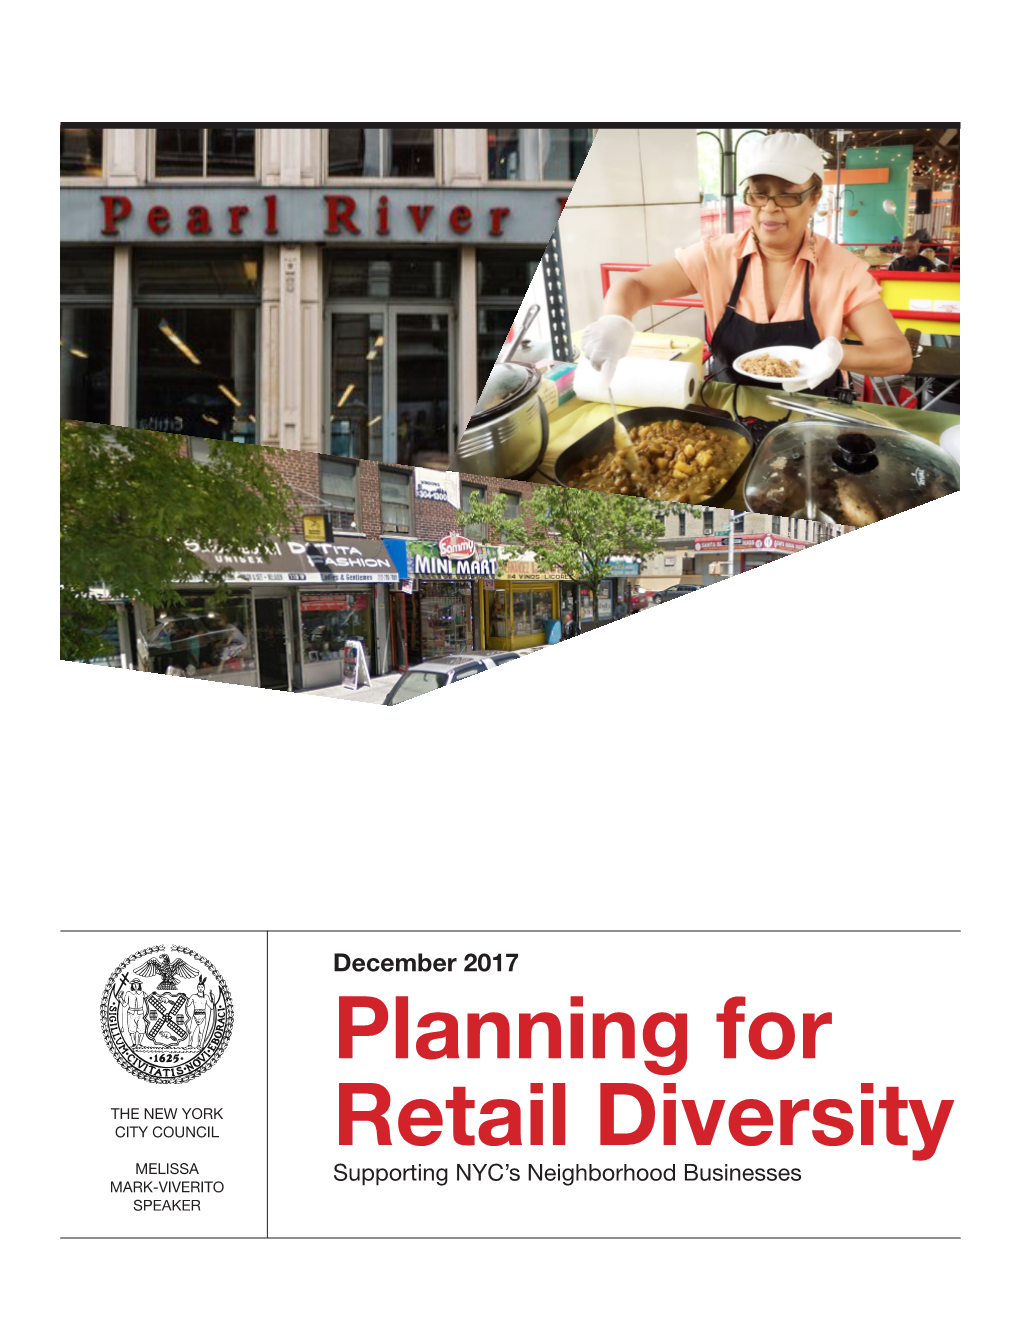 PLANNING for RETAIL DIVERSITY 1 NEW YORK CITY COUNCIL Executive Summary